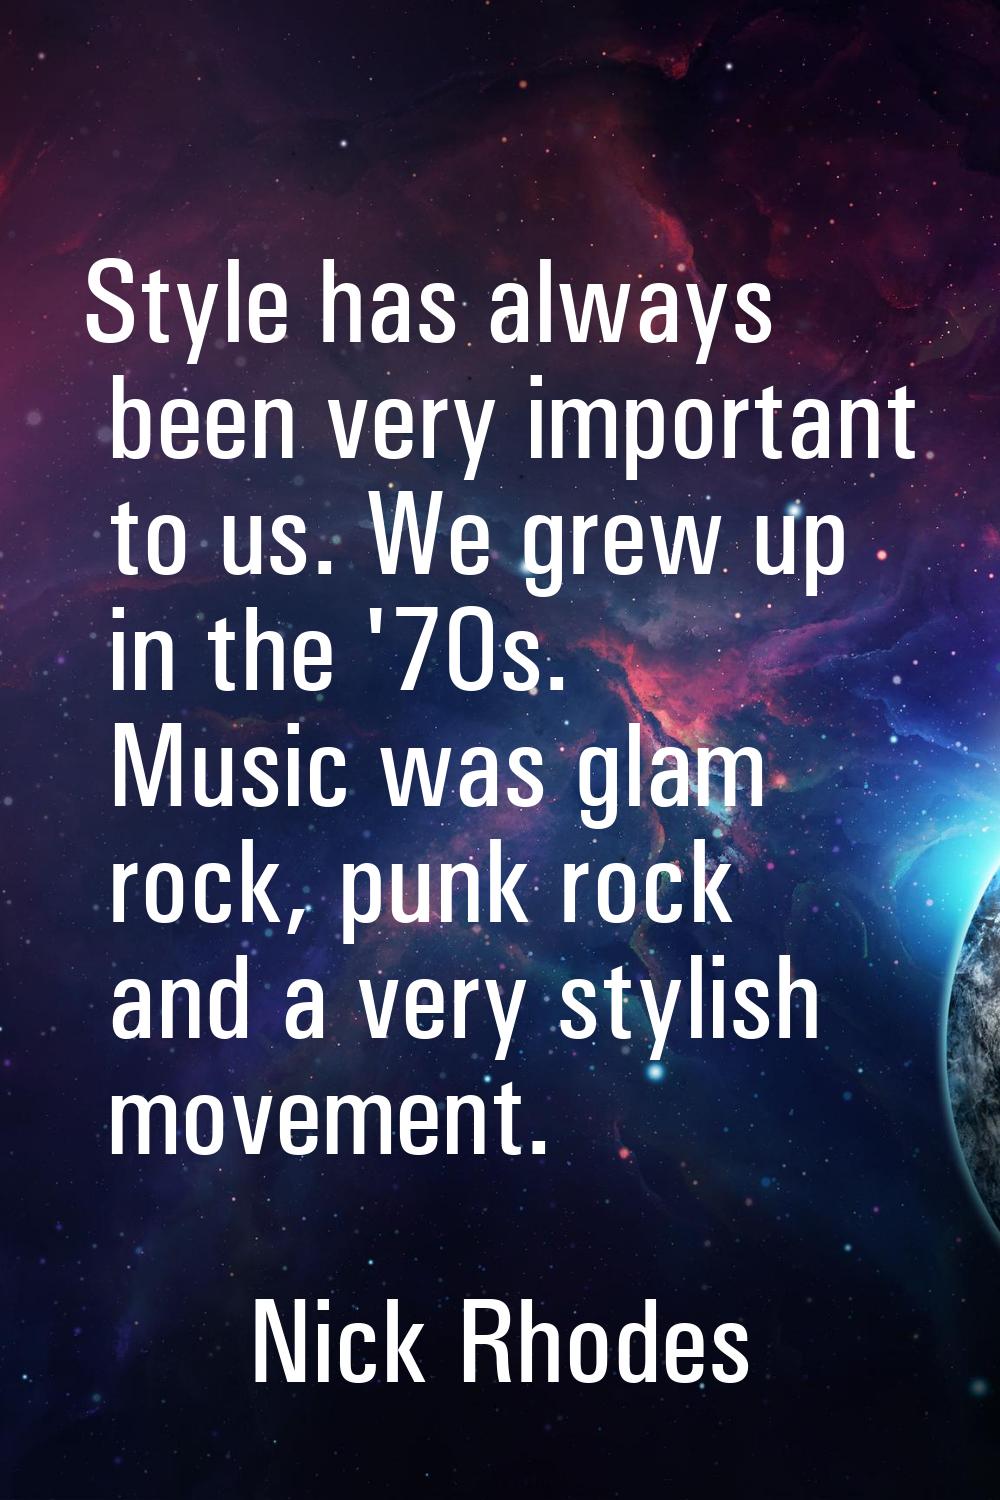 Style has always been very important to us. We grew up in the '70s. Music was glam rock, punk rock 